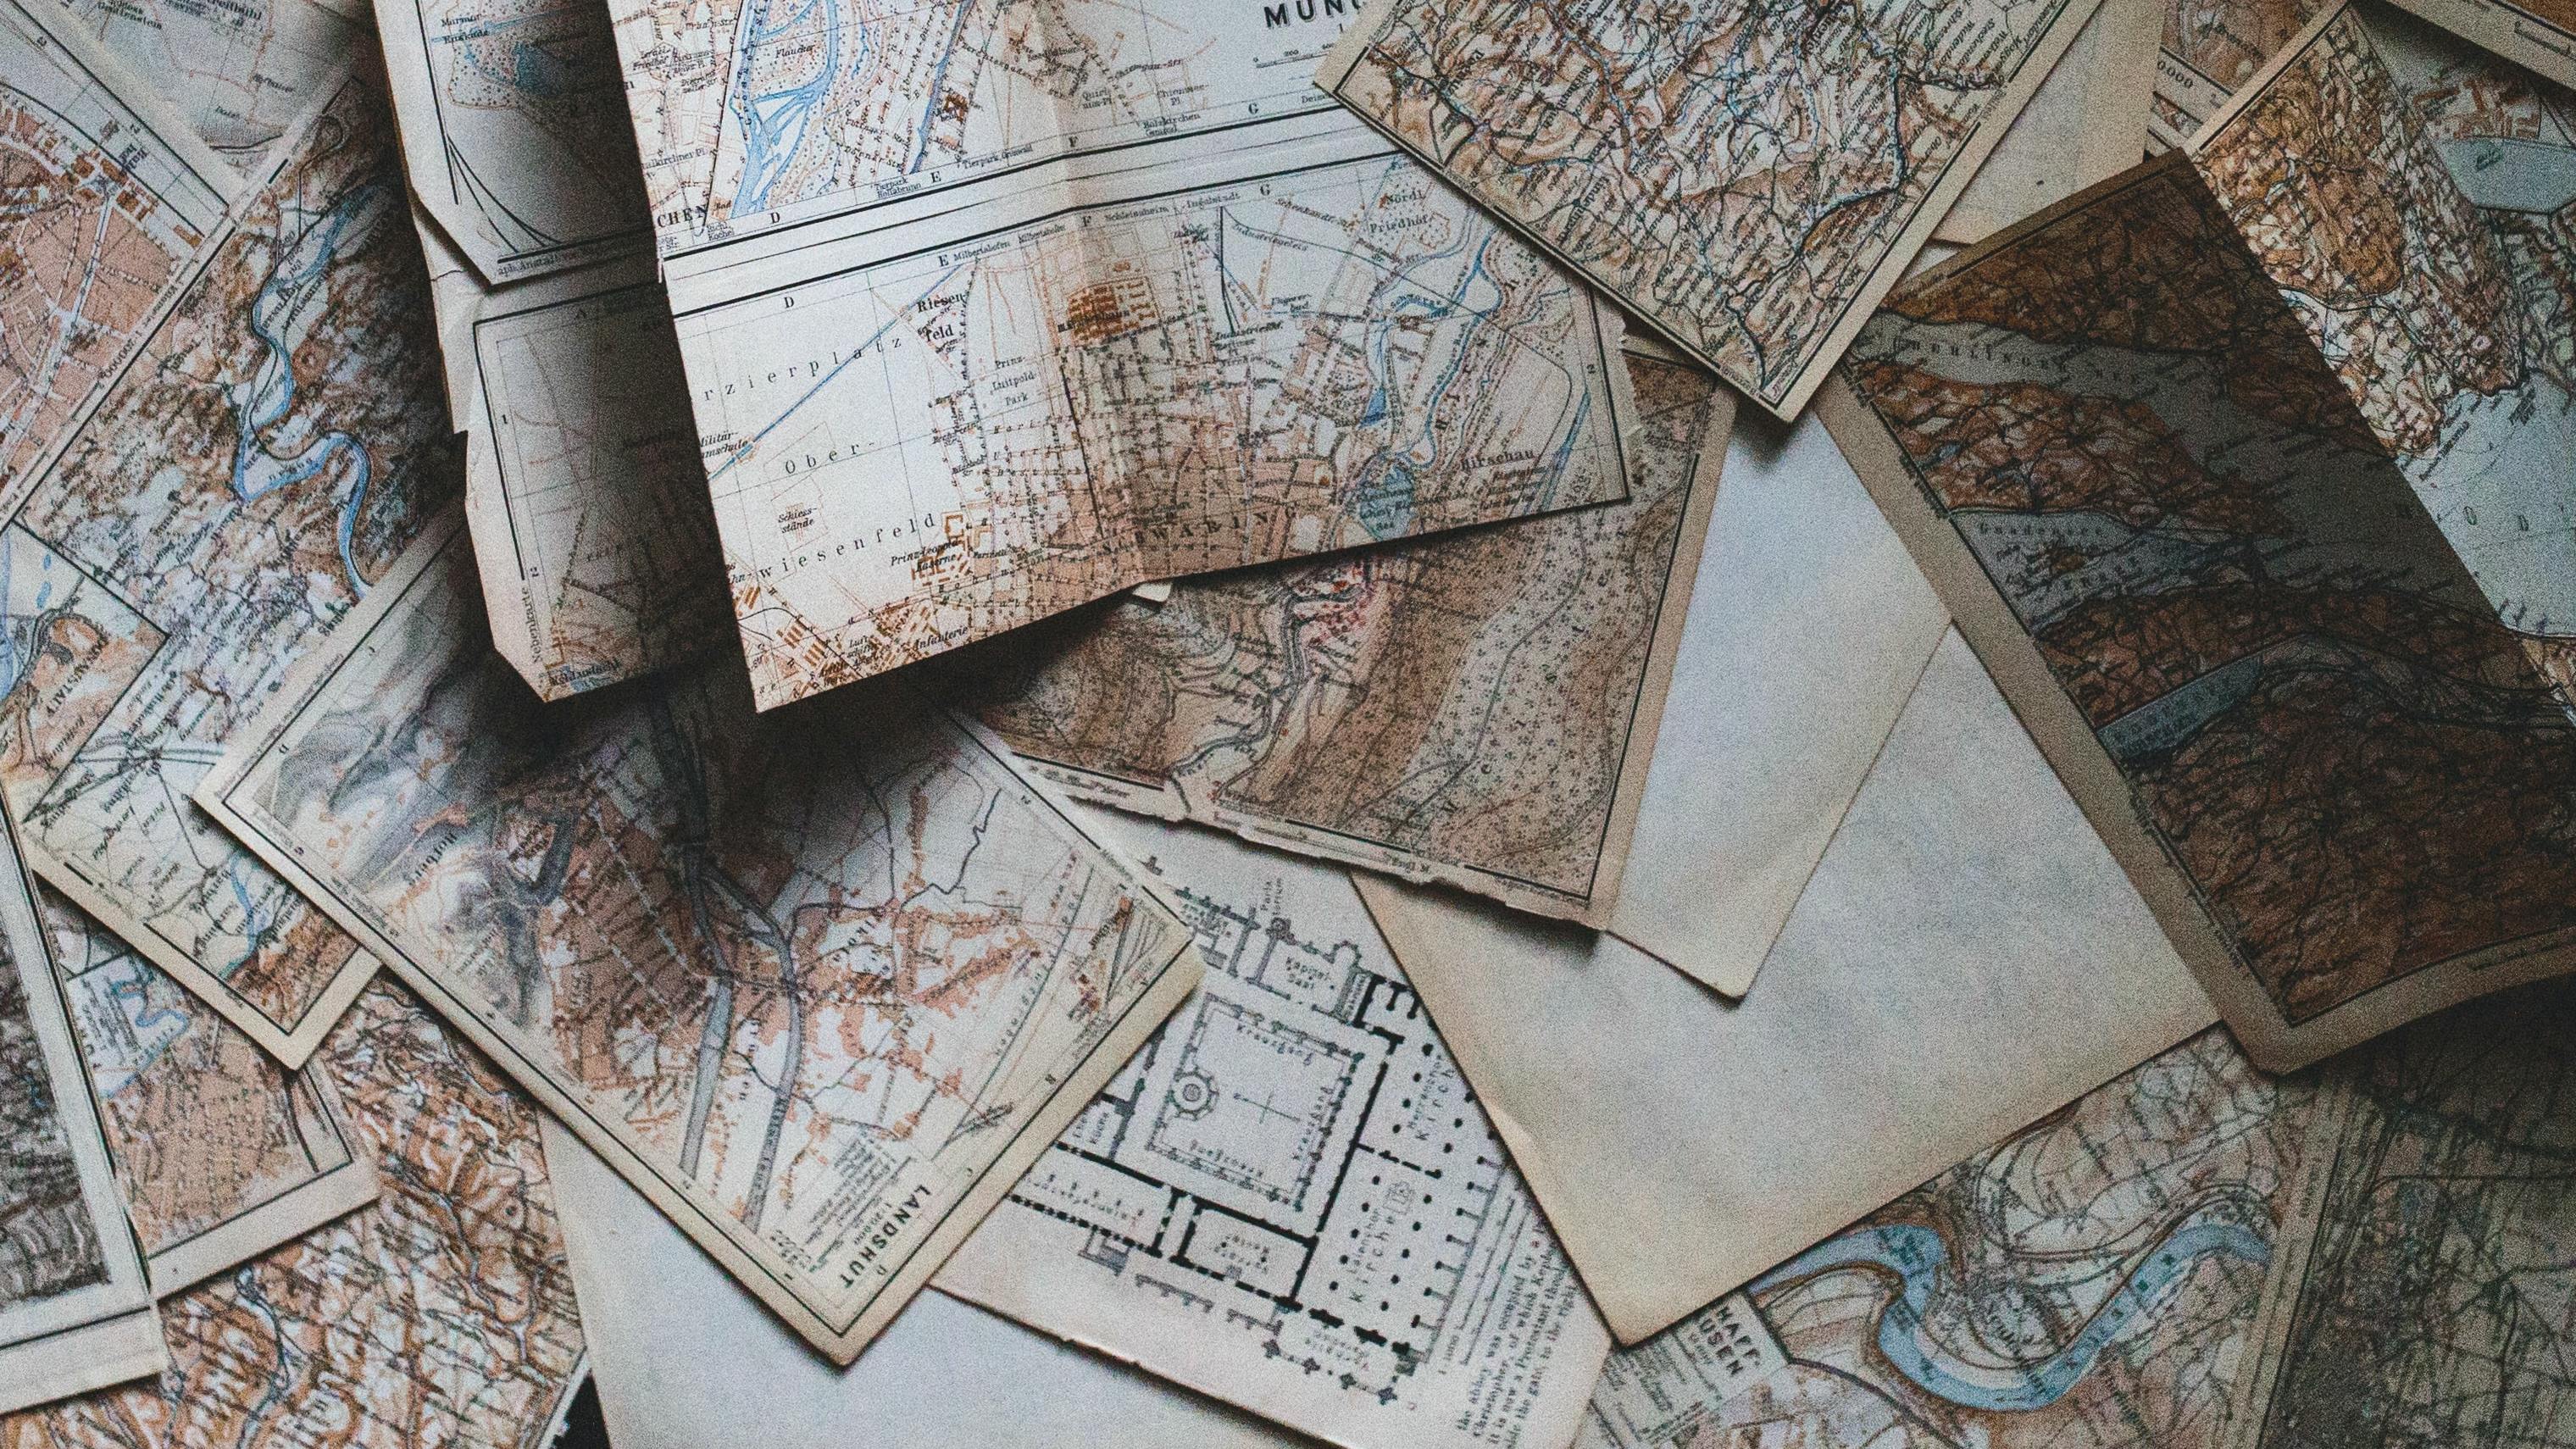 Maps scattered on a table